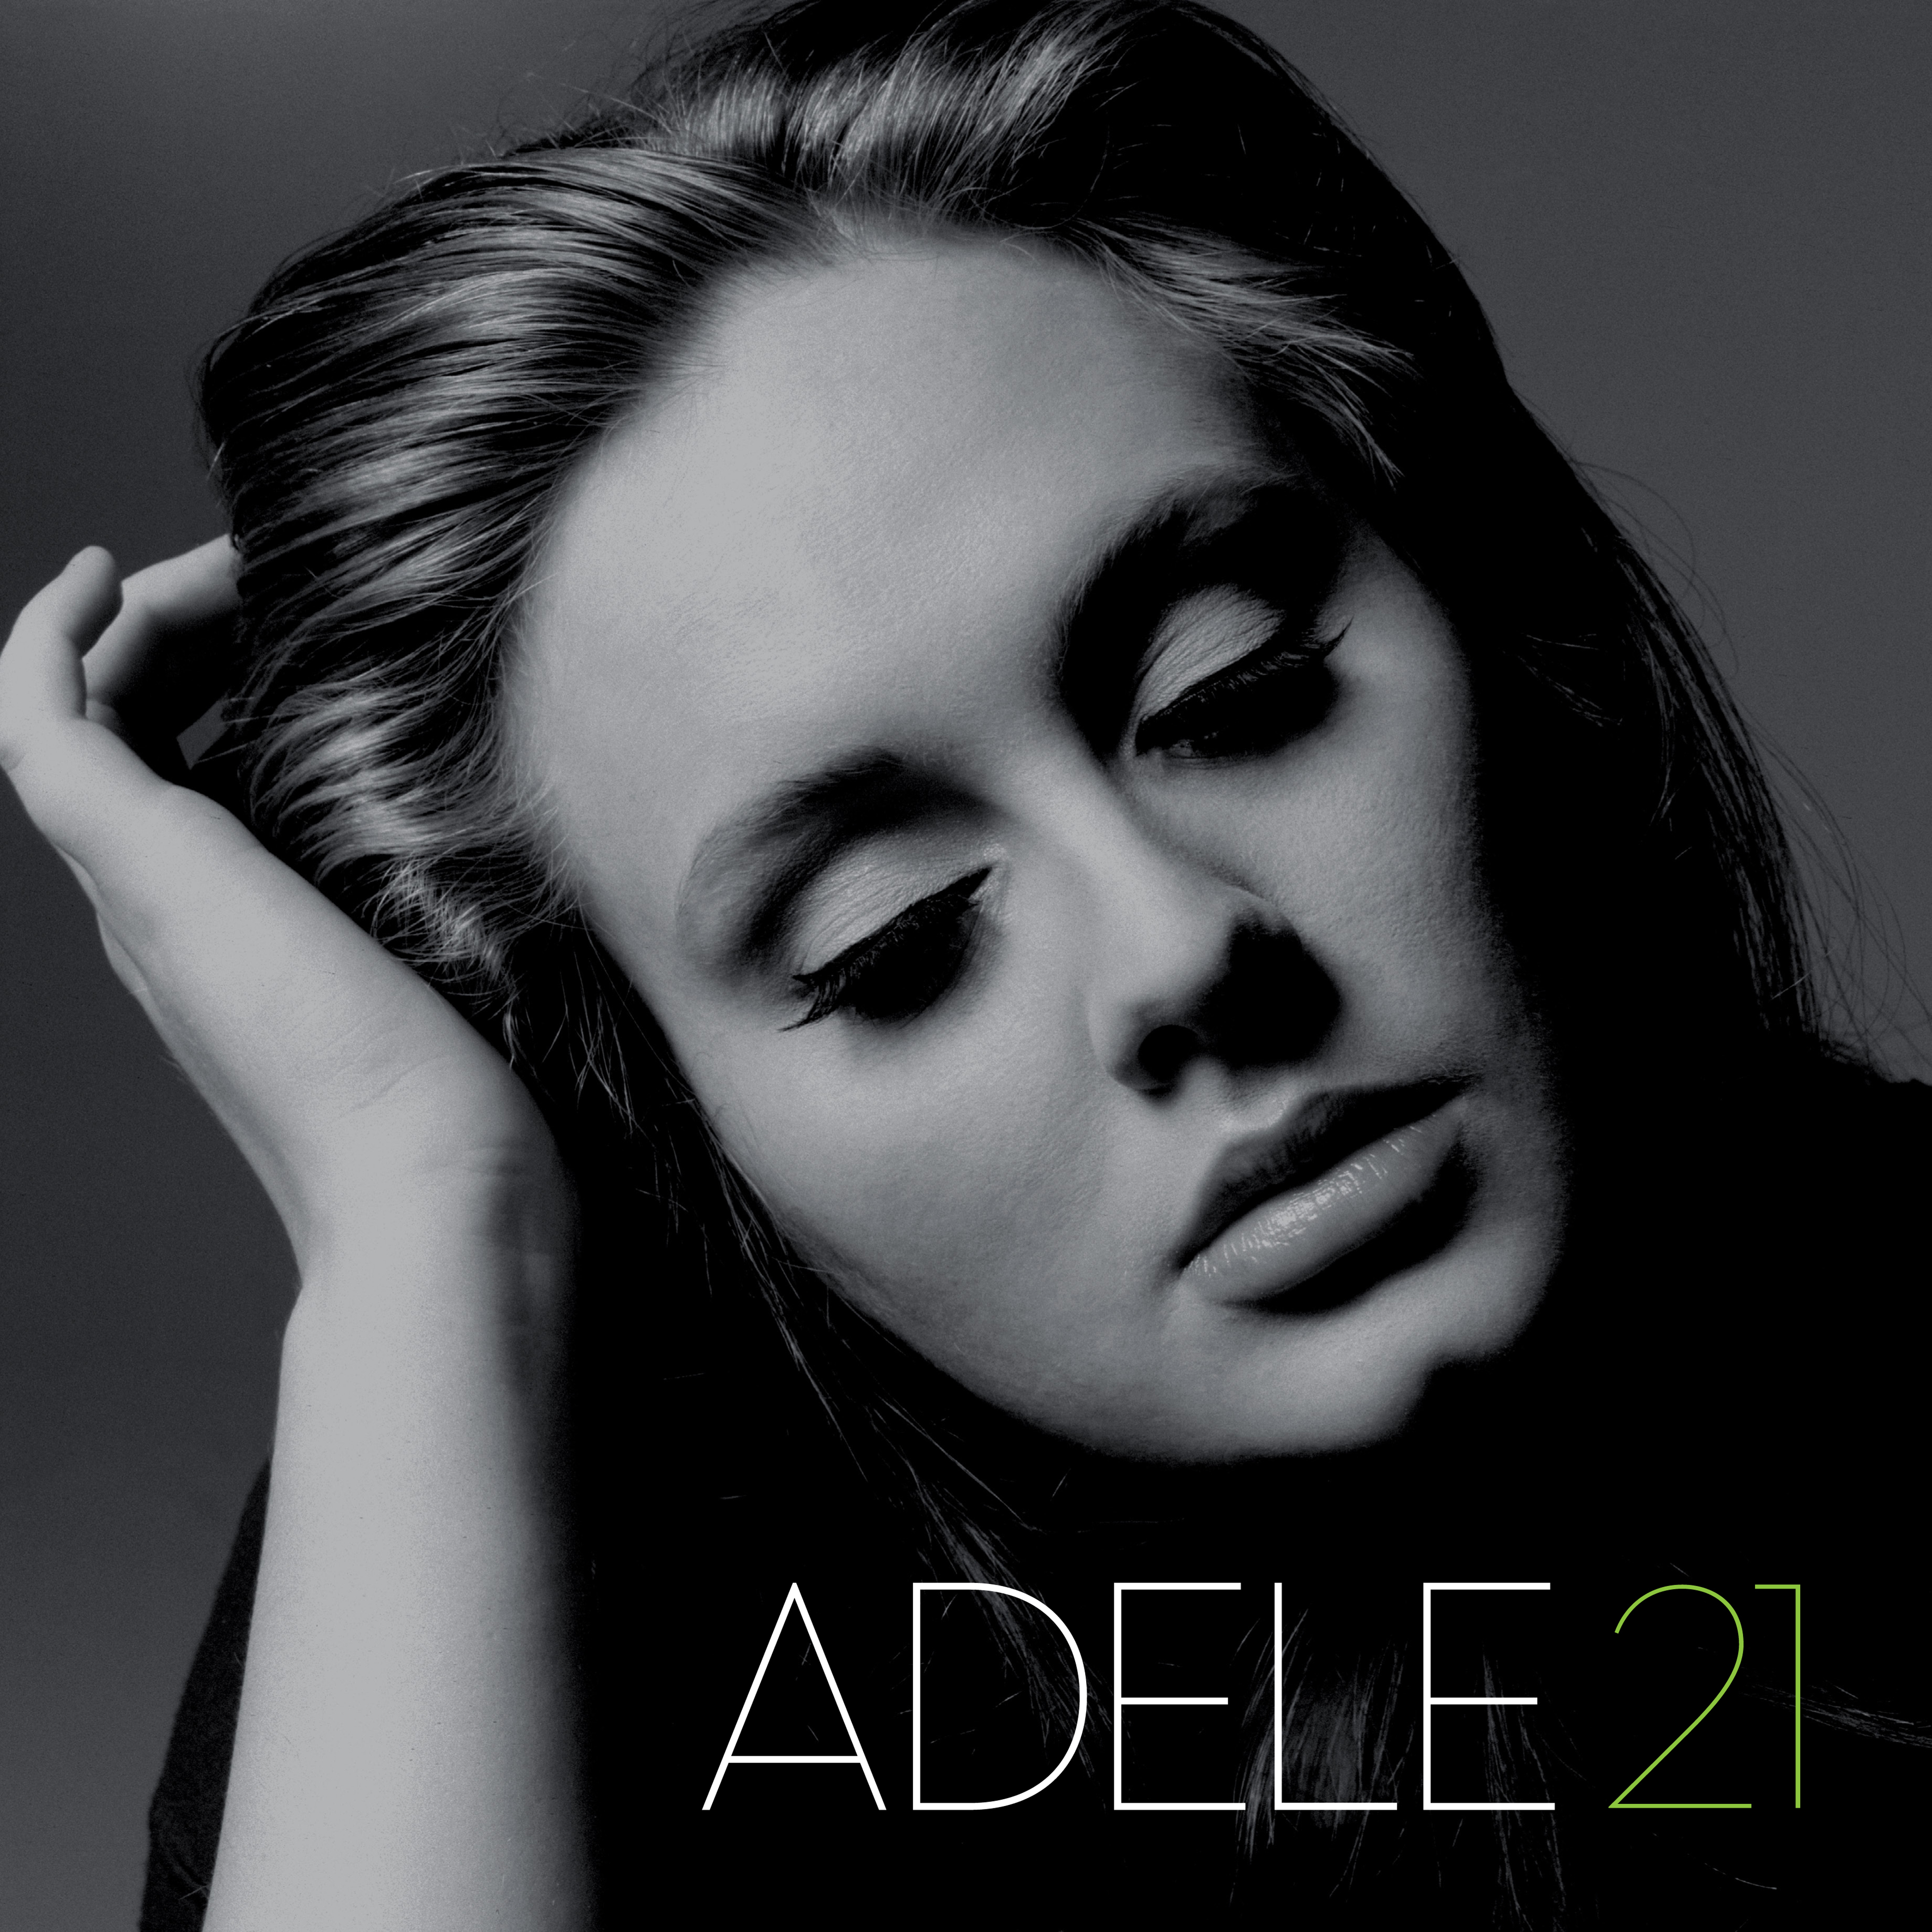 List of awards and nominations received by Adele - Wikipedia